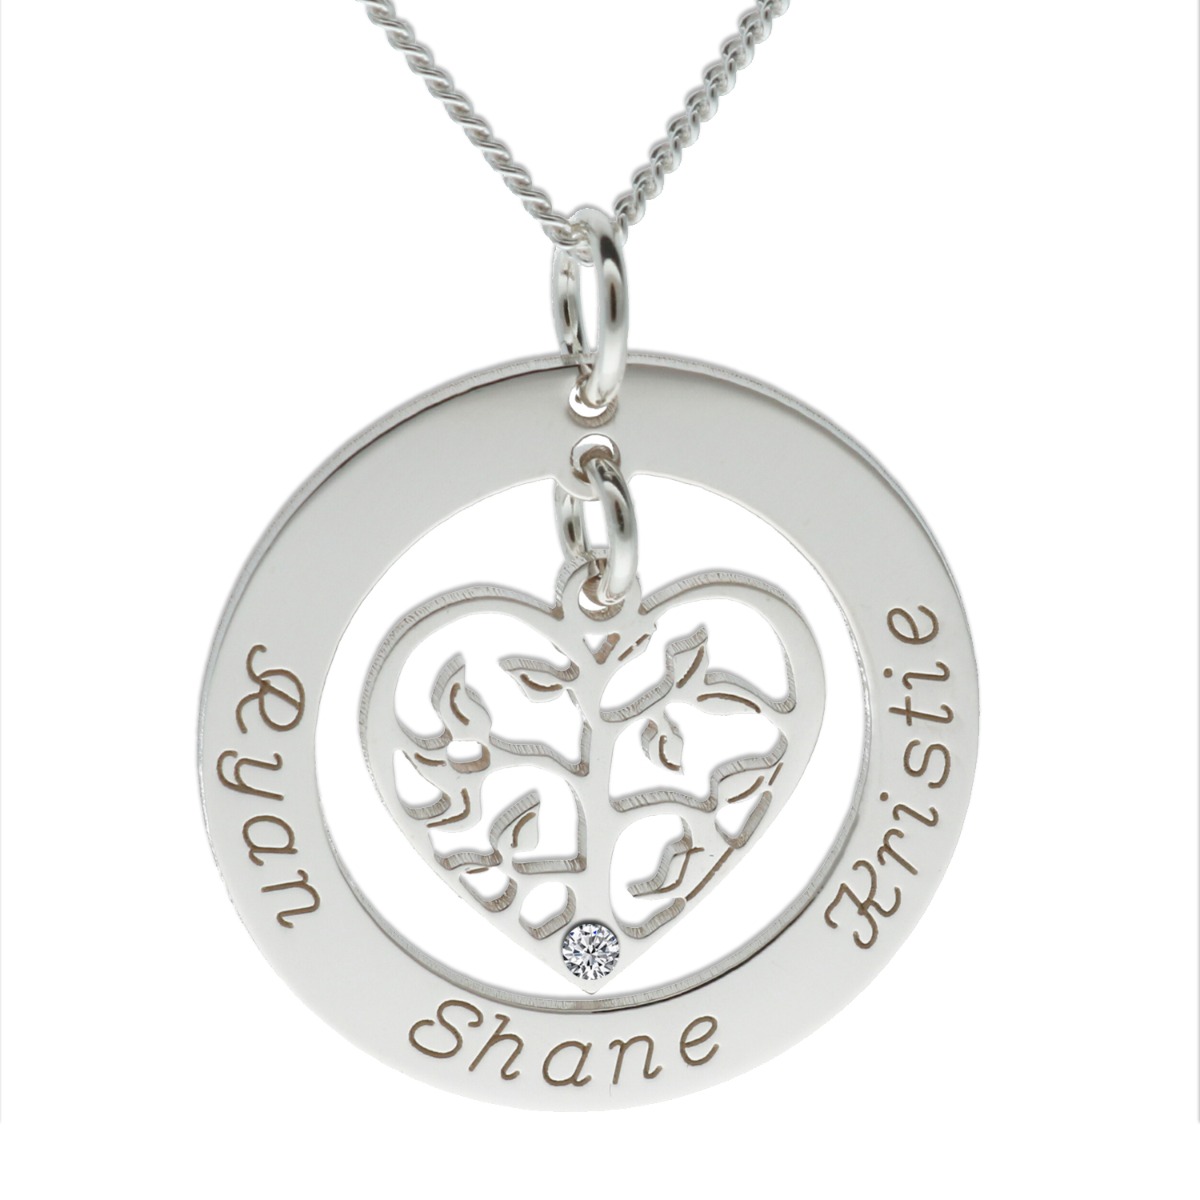 Sterling Silver Filigree Heart Tree of Life Family Necklace With Crystal Or Real Diamond